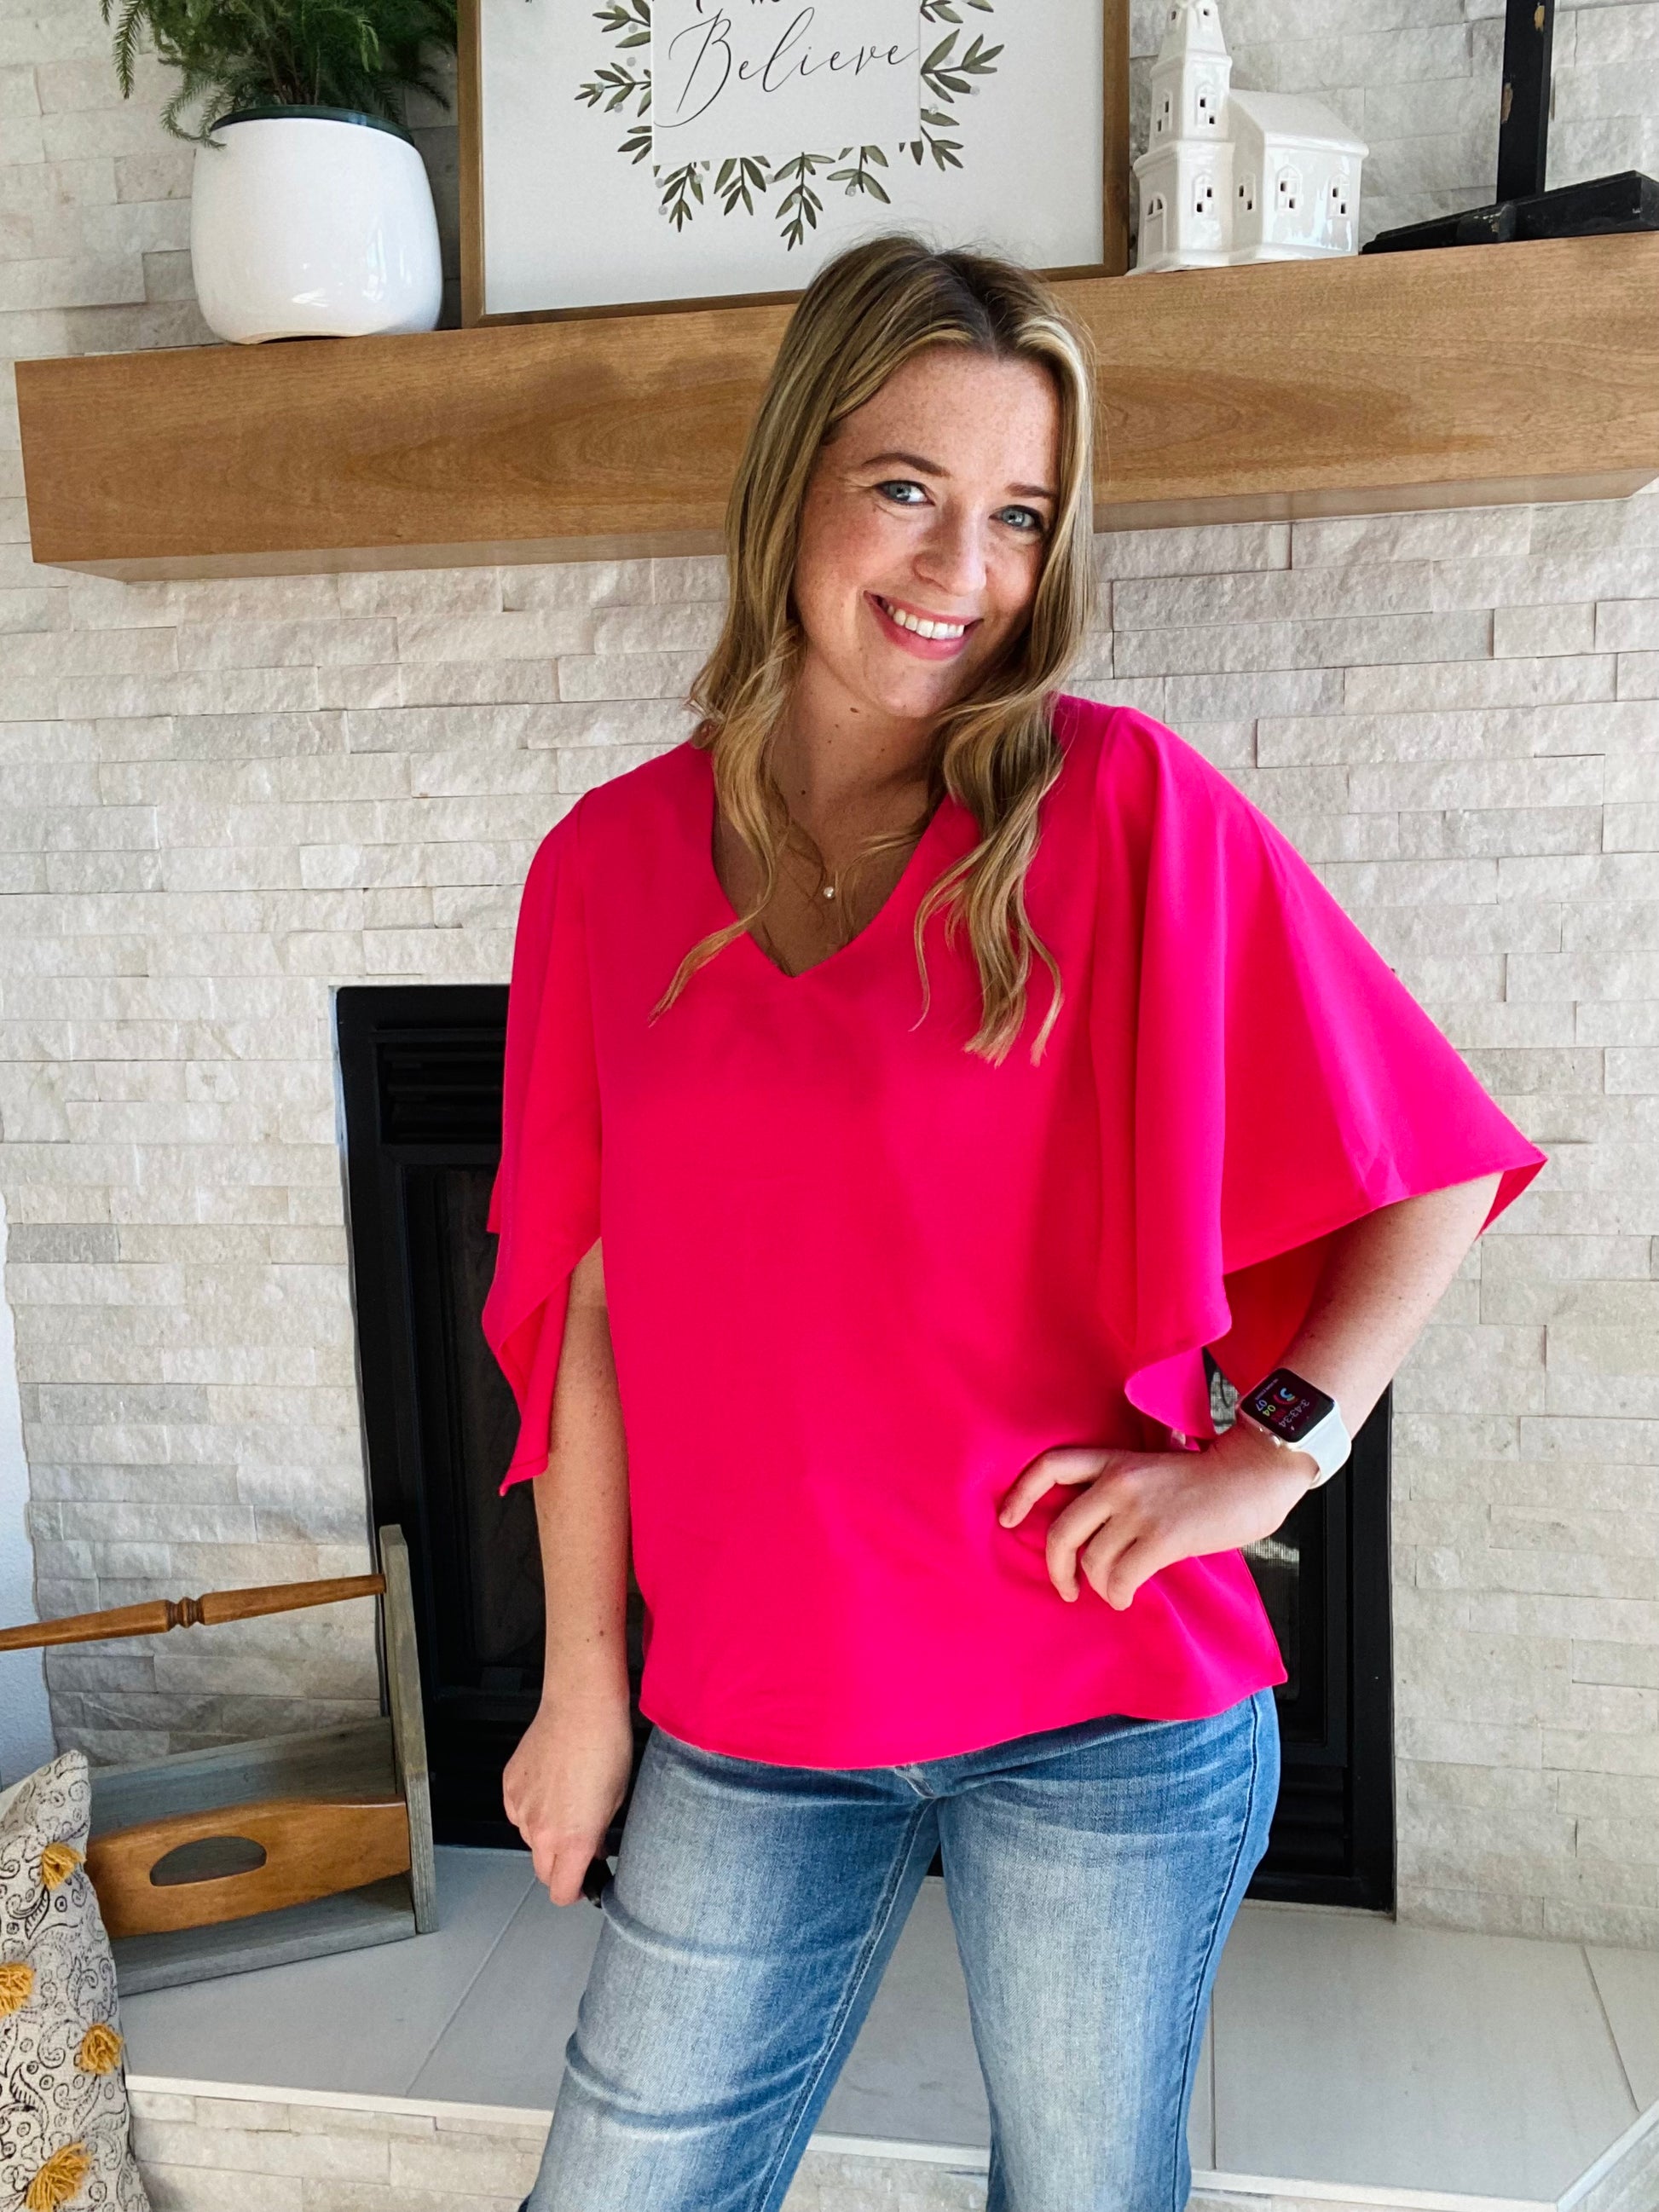 Look your best in the office this summer with the Rose Flounce Bell Sleeve Blouse. The contemporary silhouette features a distinctive bell sleeve and neon pink hue, perfect for making a statement! This style pairs effortlessly with denim and black pants, making it a versatile addition to your wardrobe. Look sharp and stay cool this season.